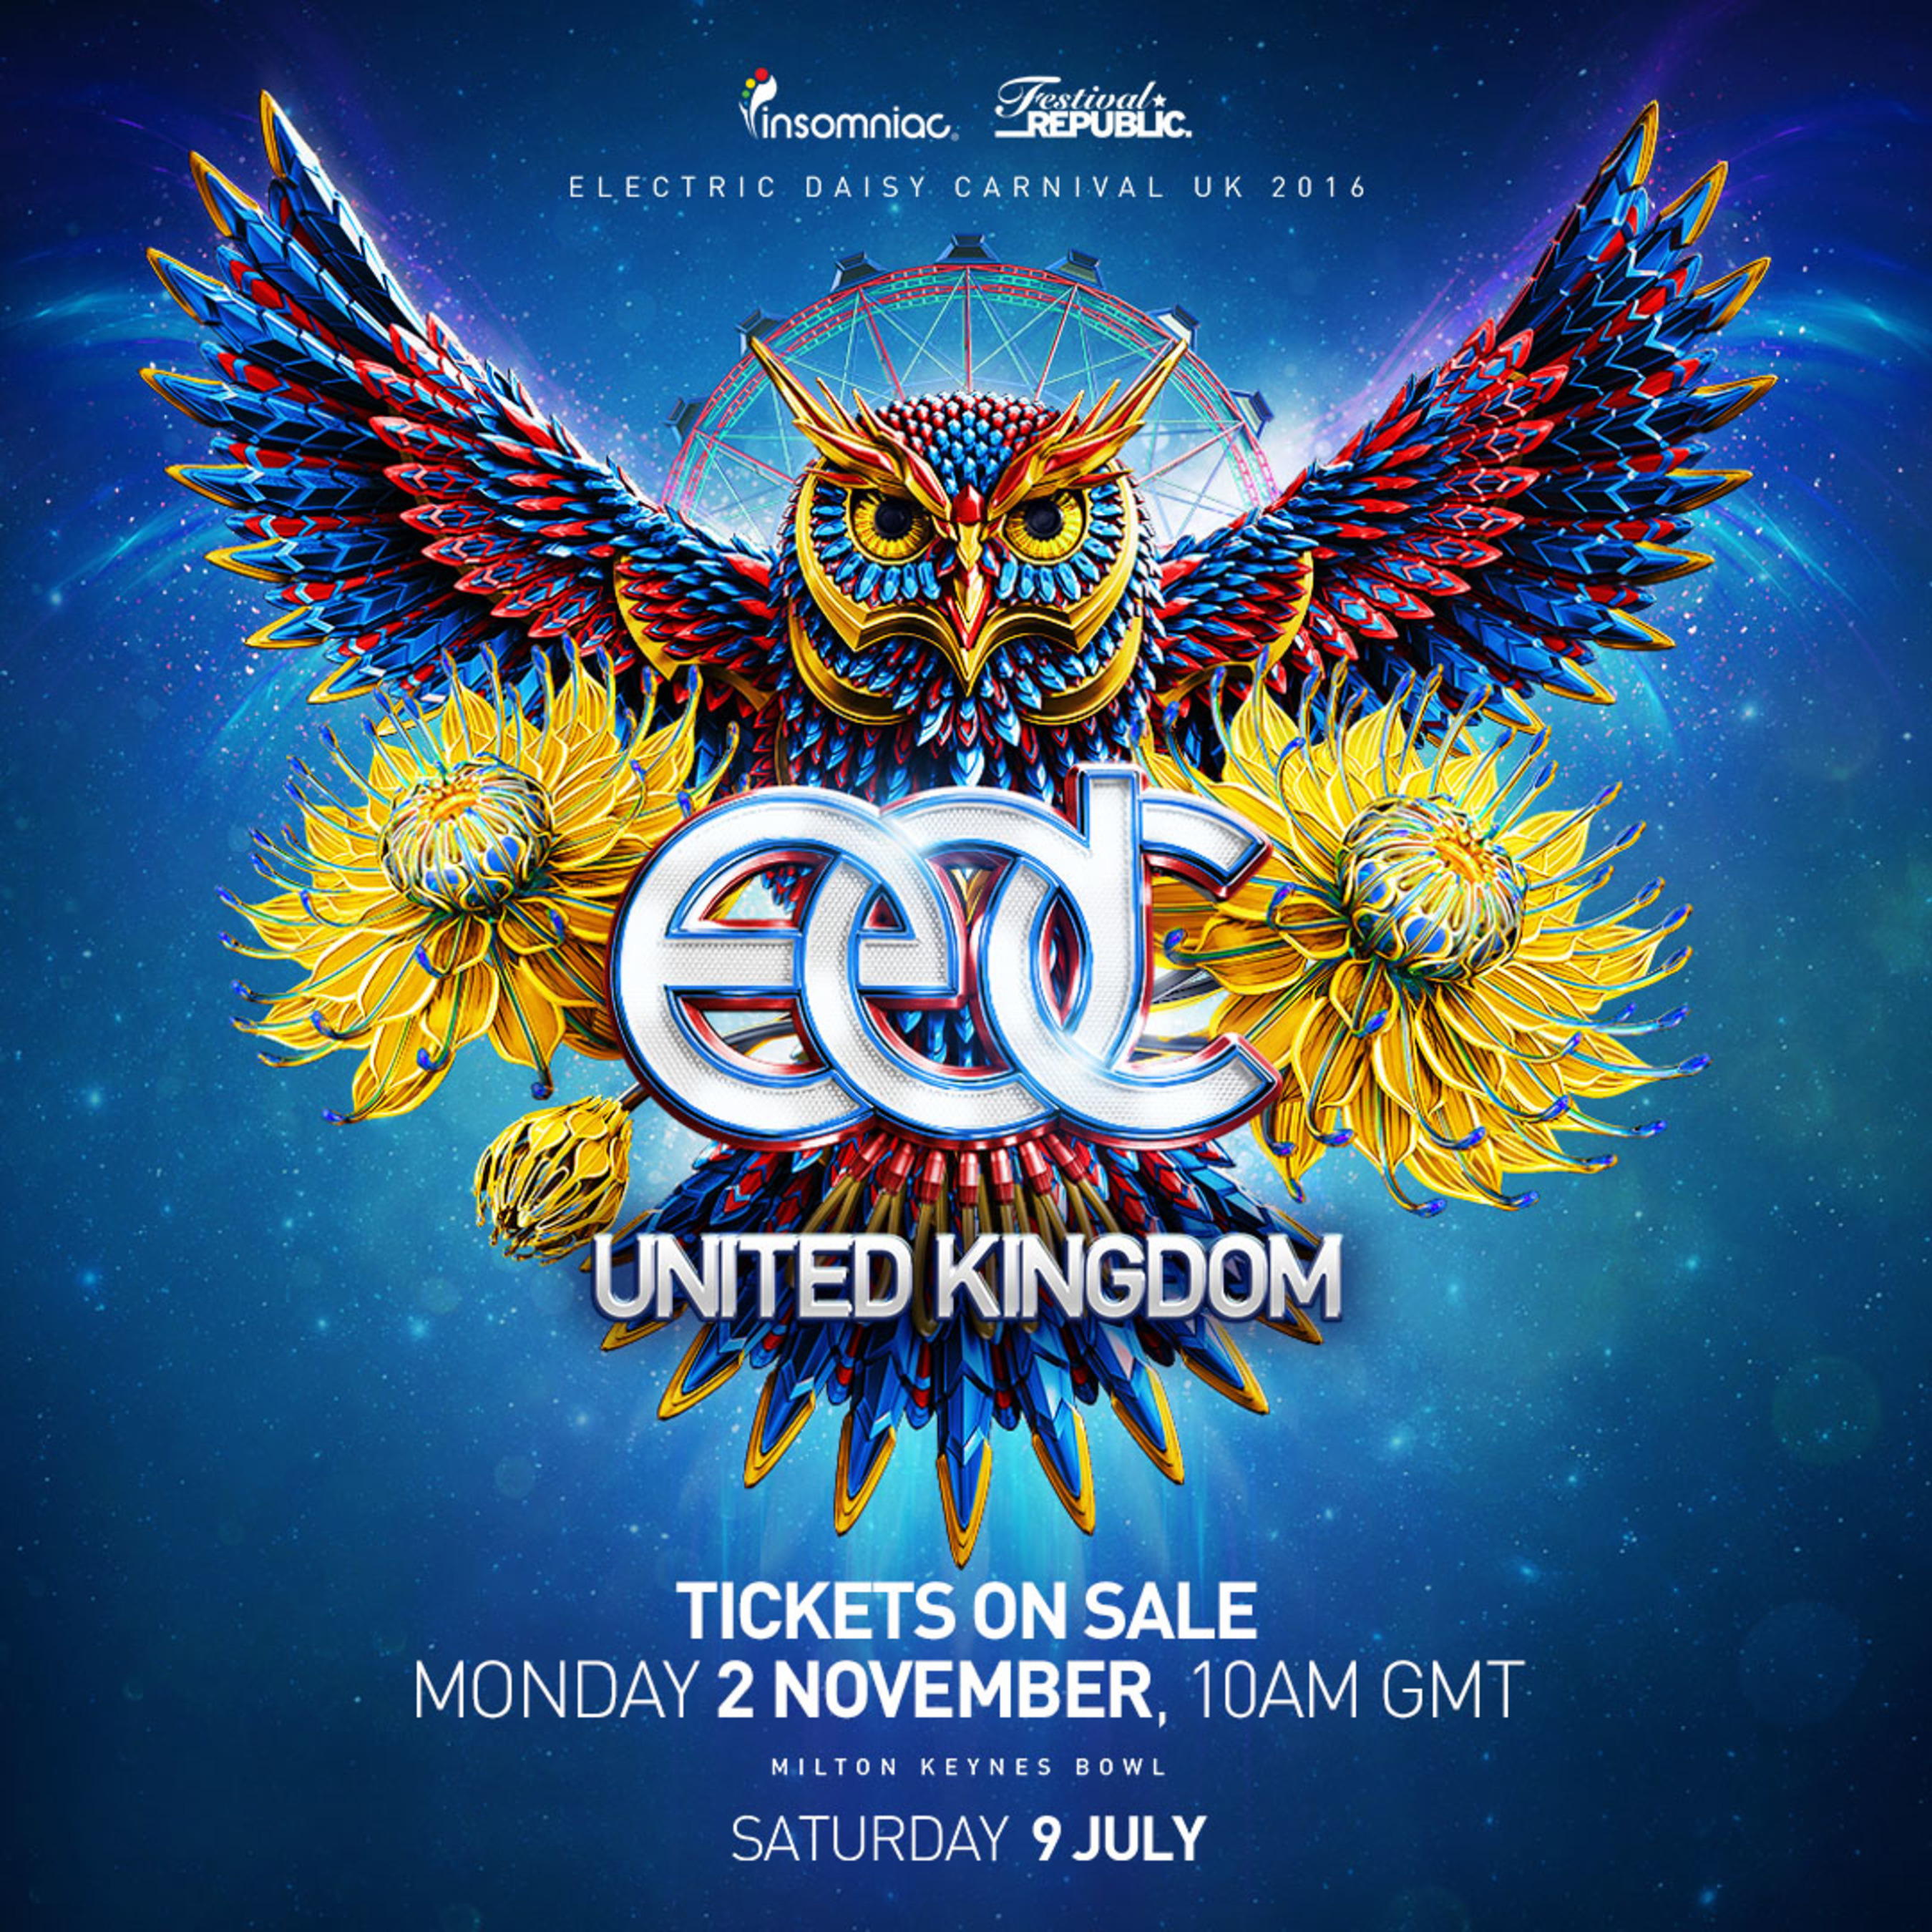 Tickets for the 4th annual Electric Daisy Carnival, UK go on sale Monday, November 2.